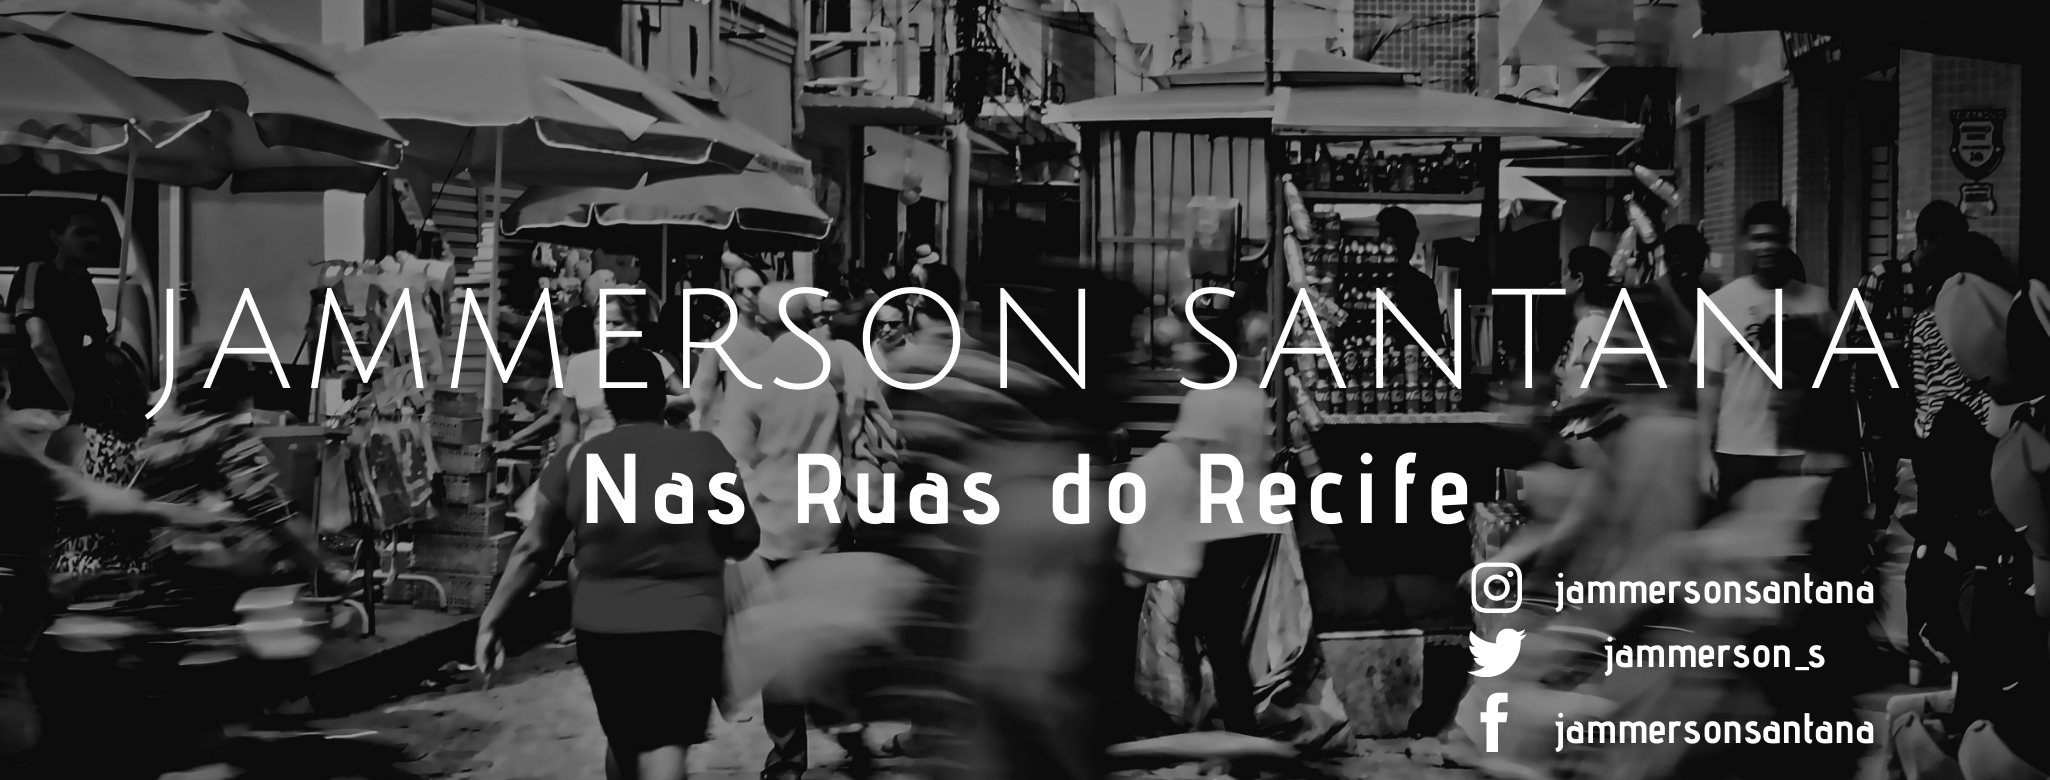 Jammerson Santana Redes.png